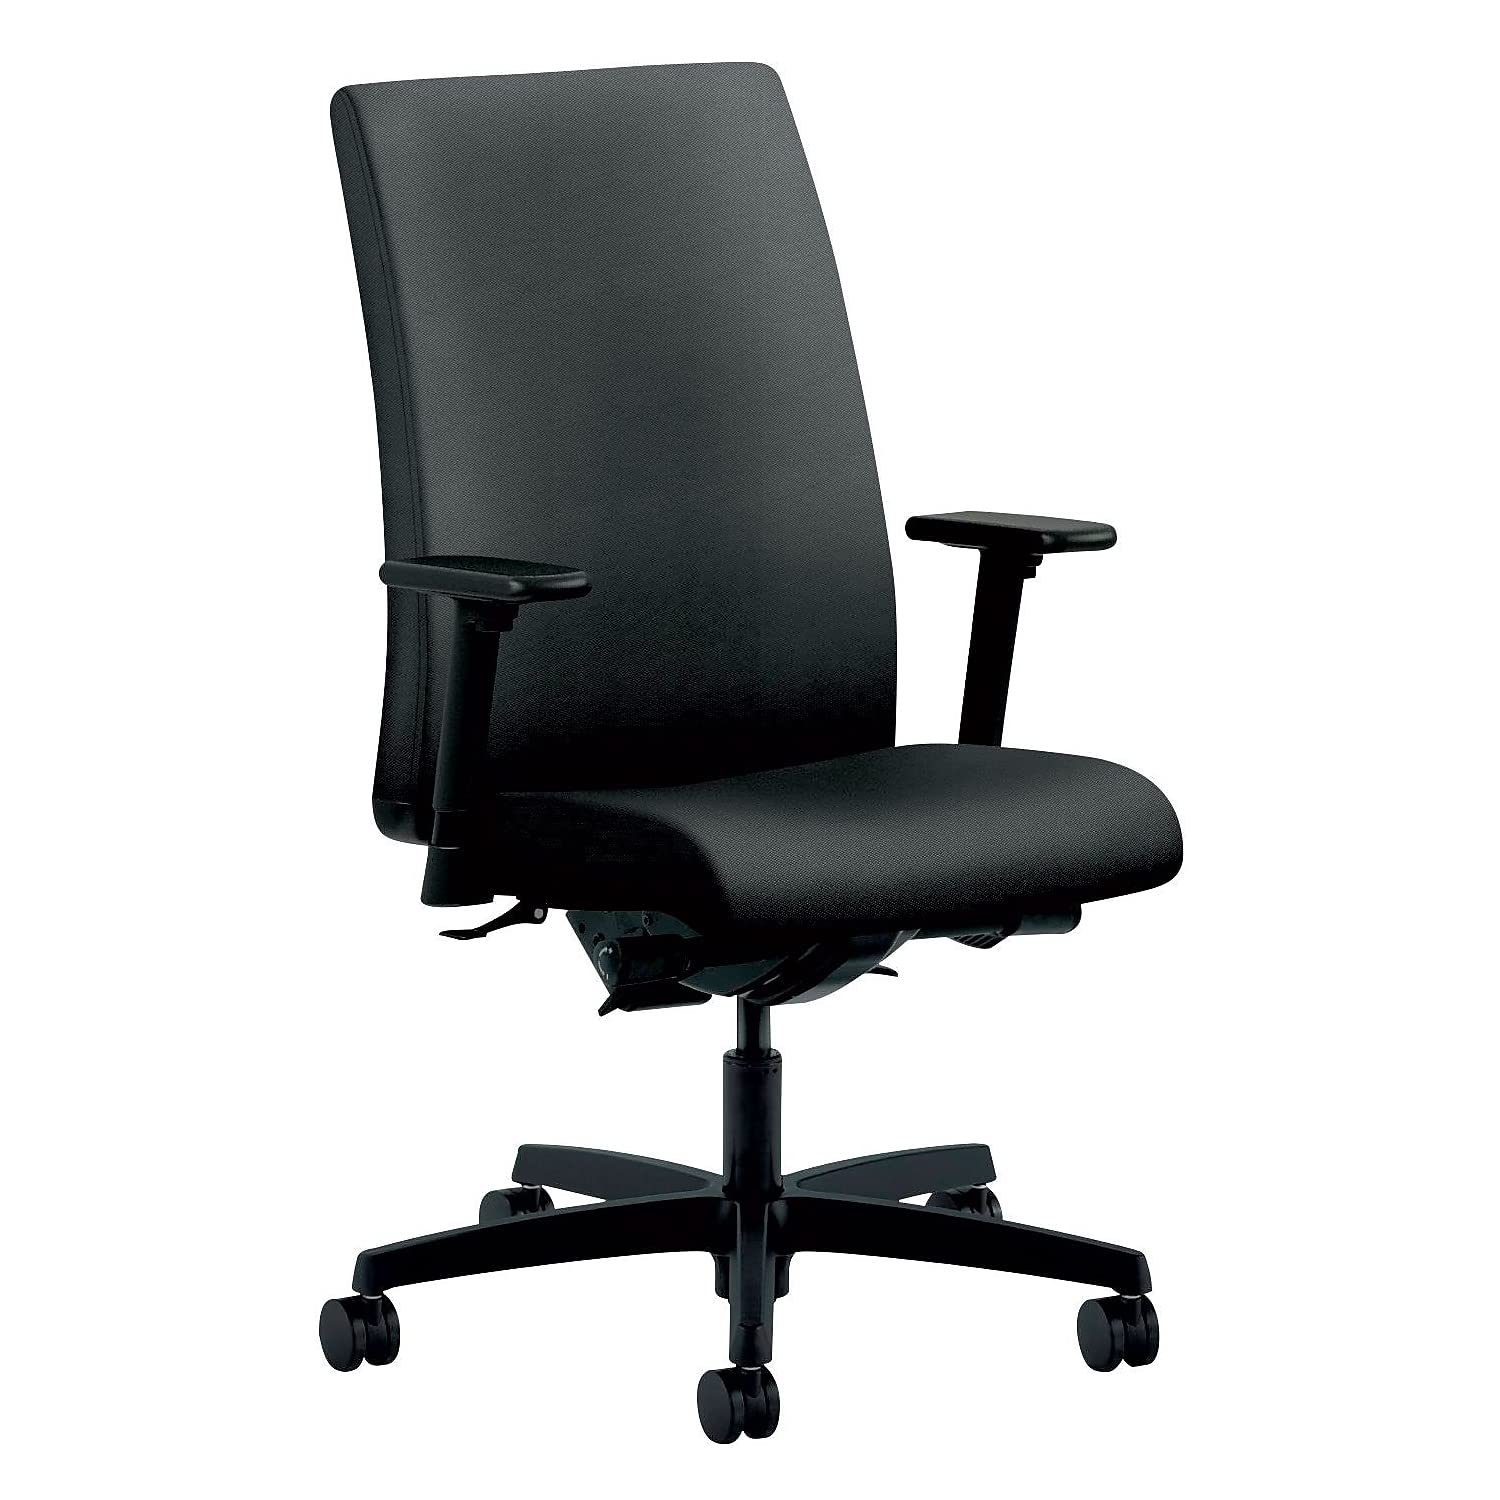 HON Ignition Series Mid-Back Work Chair - Upholstered Computer Chair for Office Desk, Onyx (HIWM3)